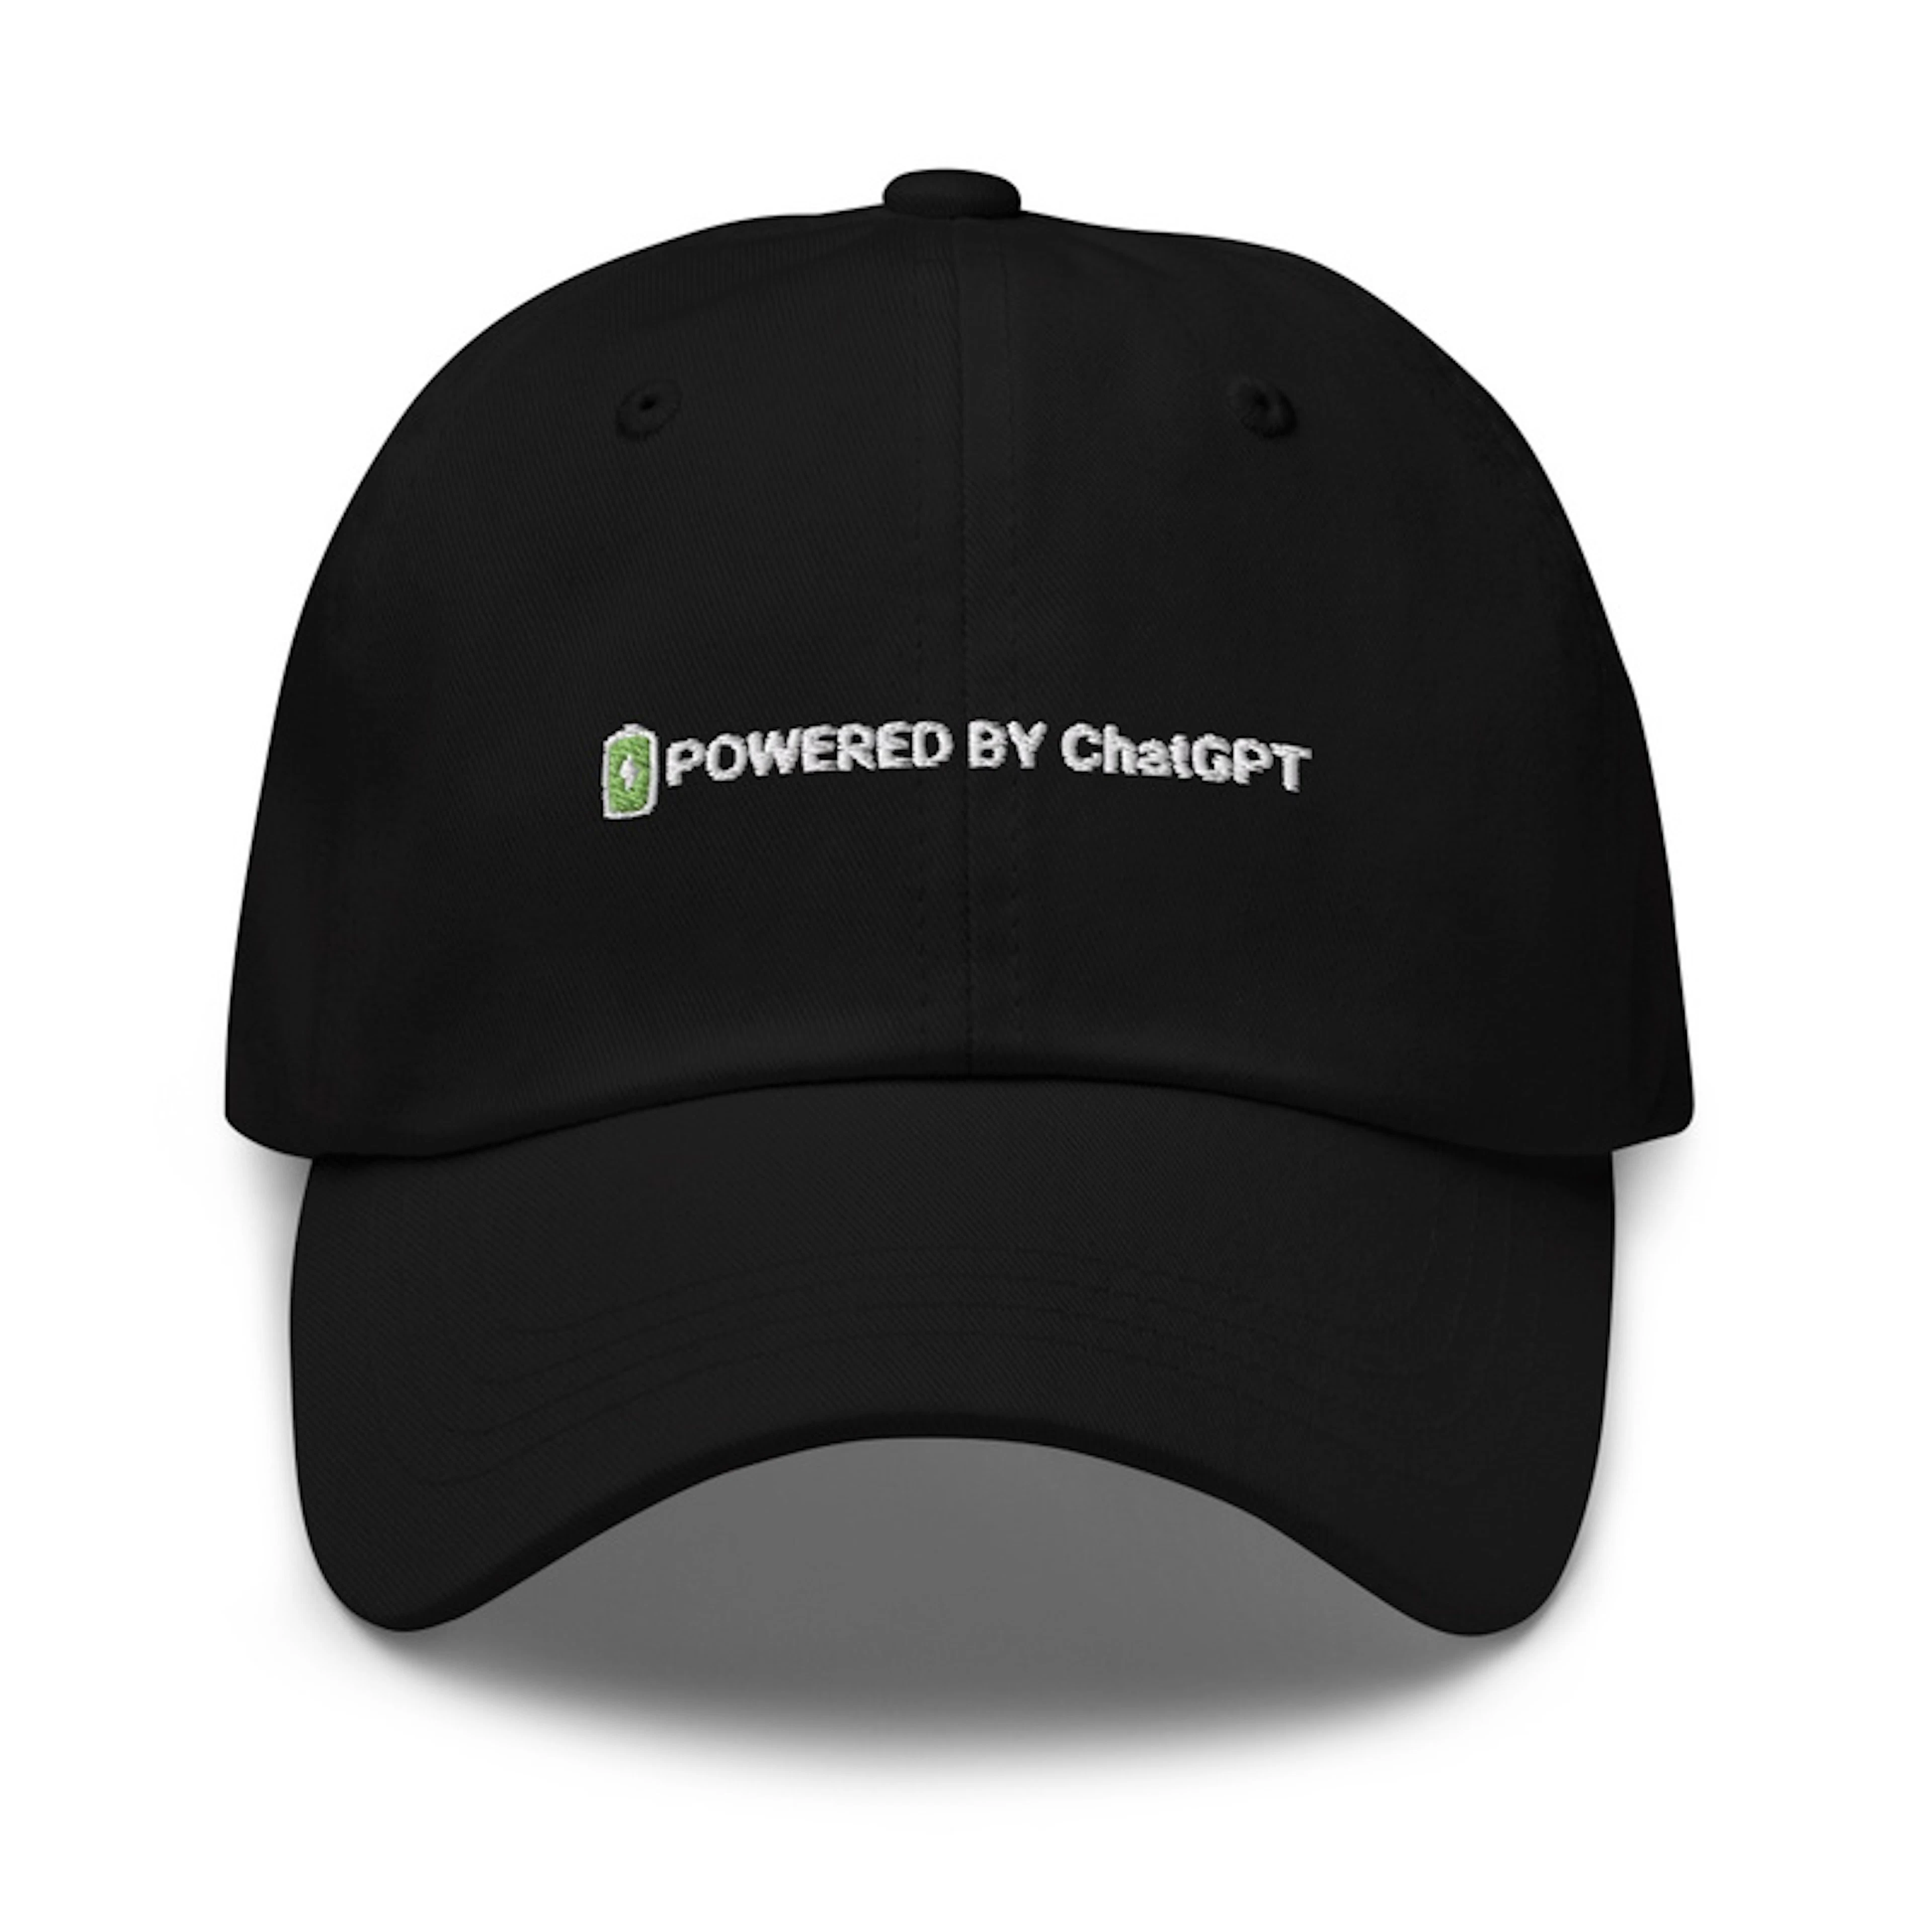 Powered By ChatGPT Hat